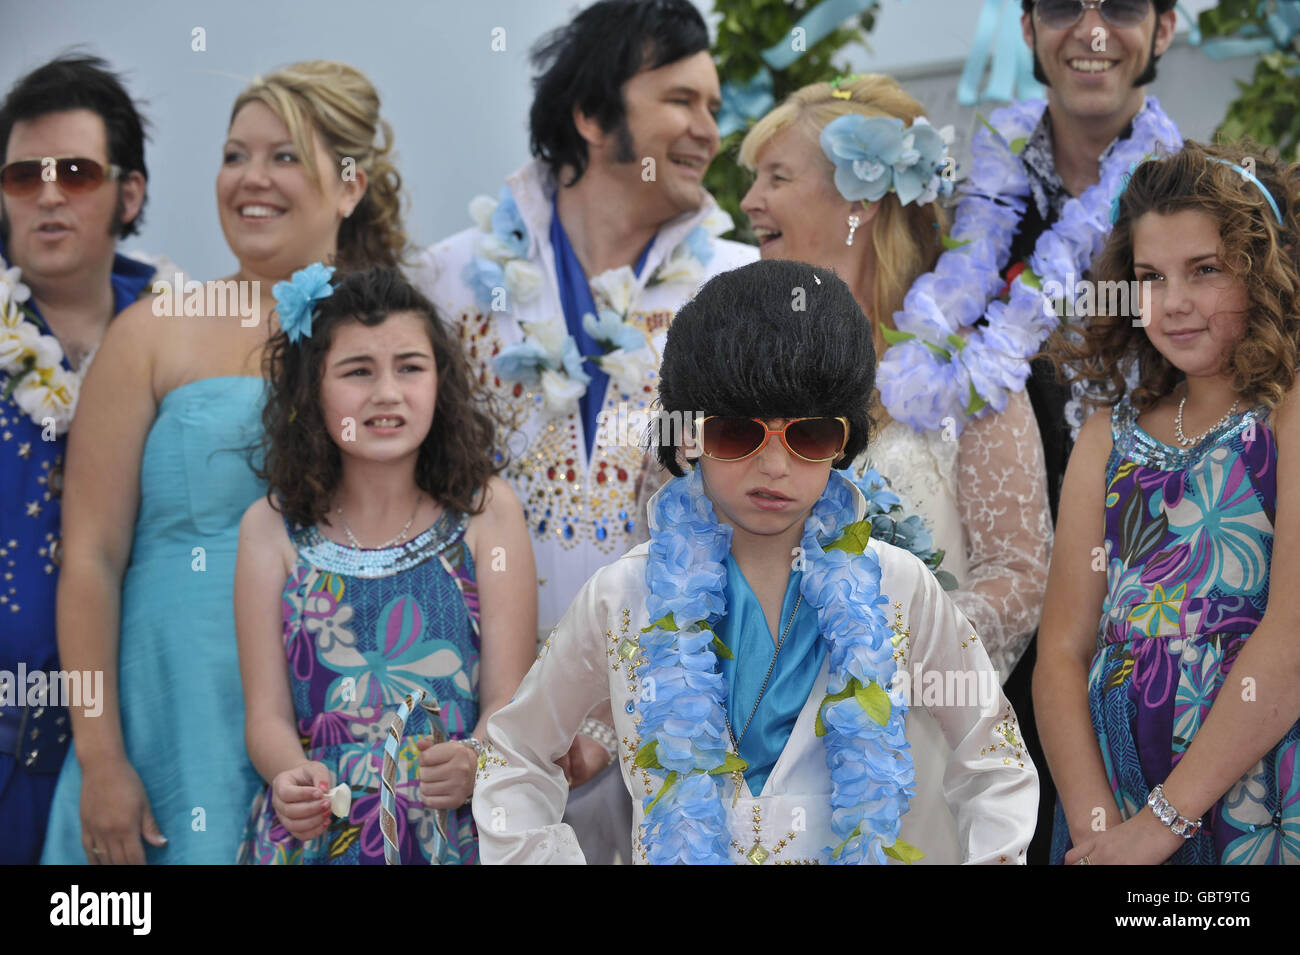 Rhys Berry, aged nine, who is Britain's youngest Elvis tribute artist at the wedding of Steve and Barbara Caprice after the couple's civil ceremony wedding in Porthcawl, Wales. The ceremony was a faithful recreation of the wedding scene from Elvis' Blue Hawaii film. Stock Photo